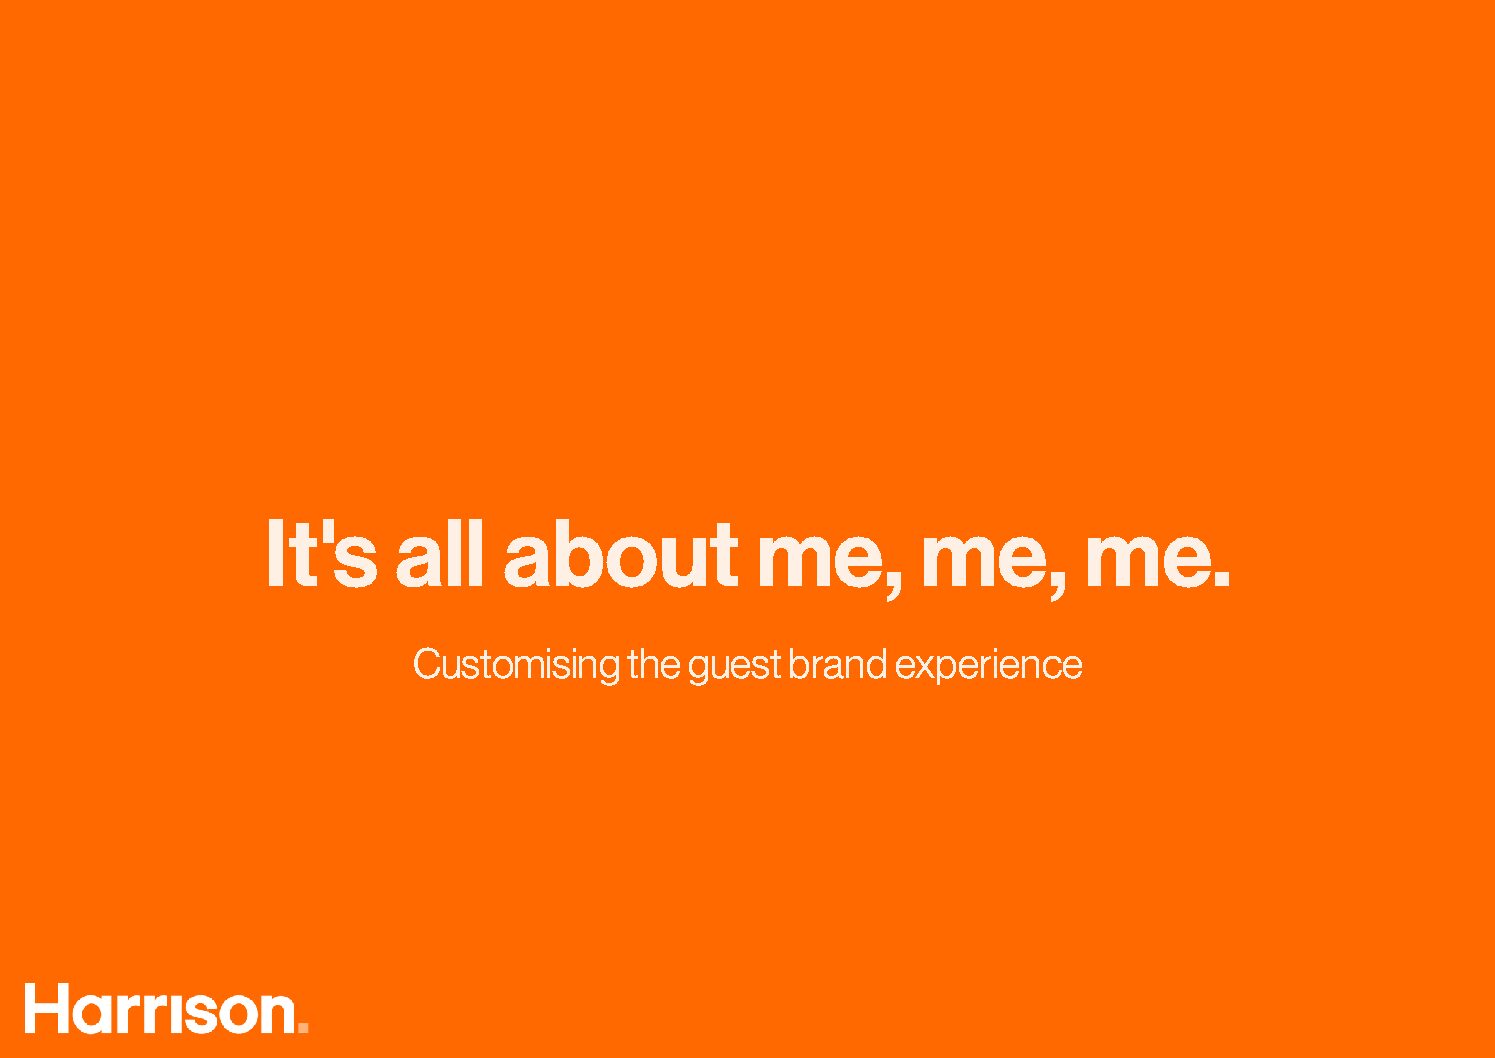 It’s all about Me Me Me – What has the pandemic taught us about the customer experience?